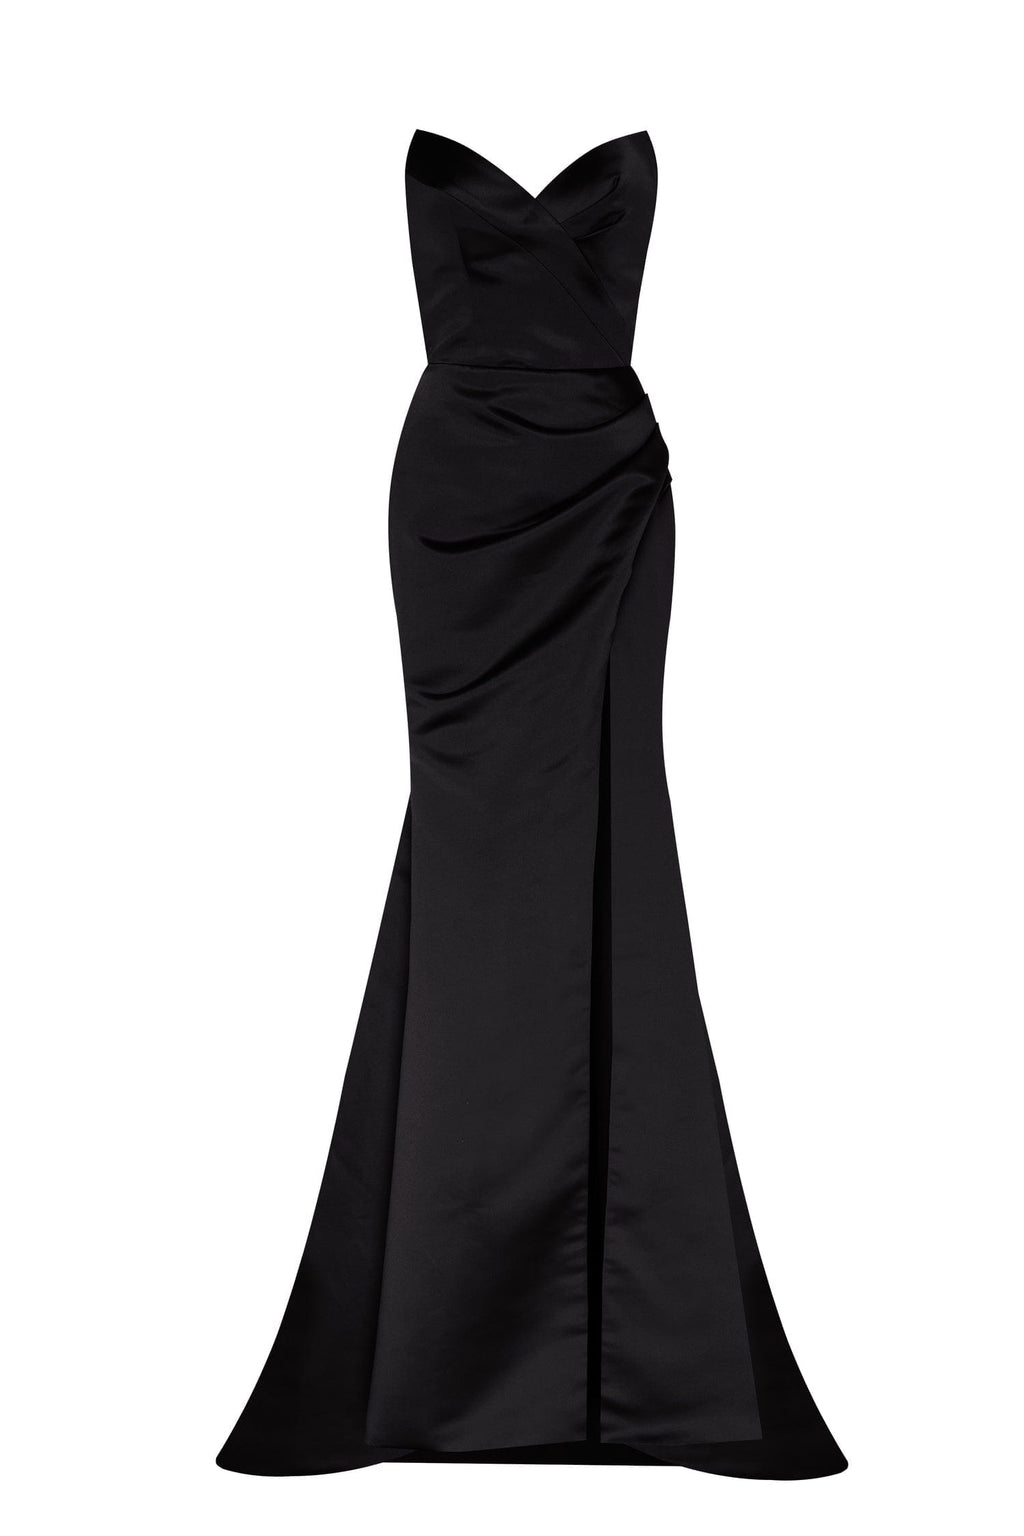 The Ultimate Wedding Guest Dress Guide for Spring / Summer | | Black tie  wedding guest dress, Black tie event dresses, Black tie wedding guests